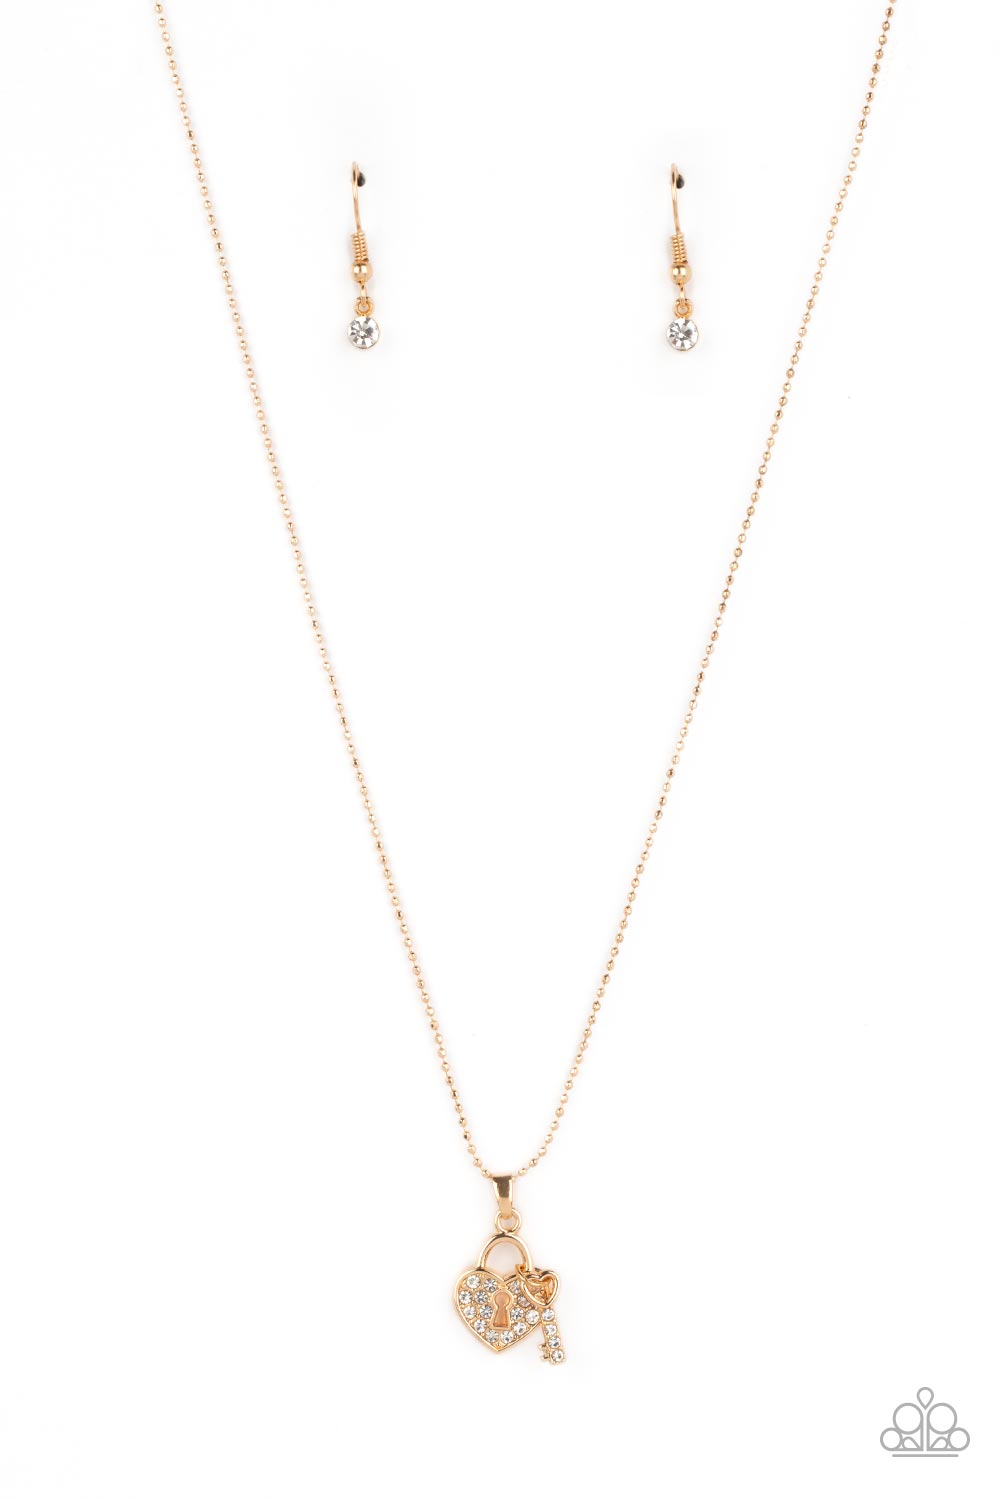 Dainty Lock and Key Necklace Silhouette